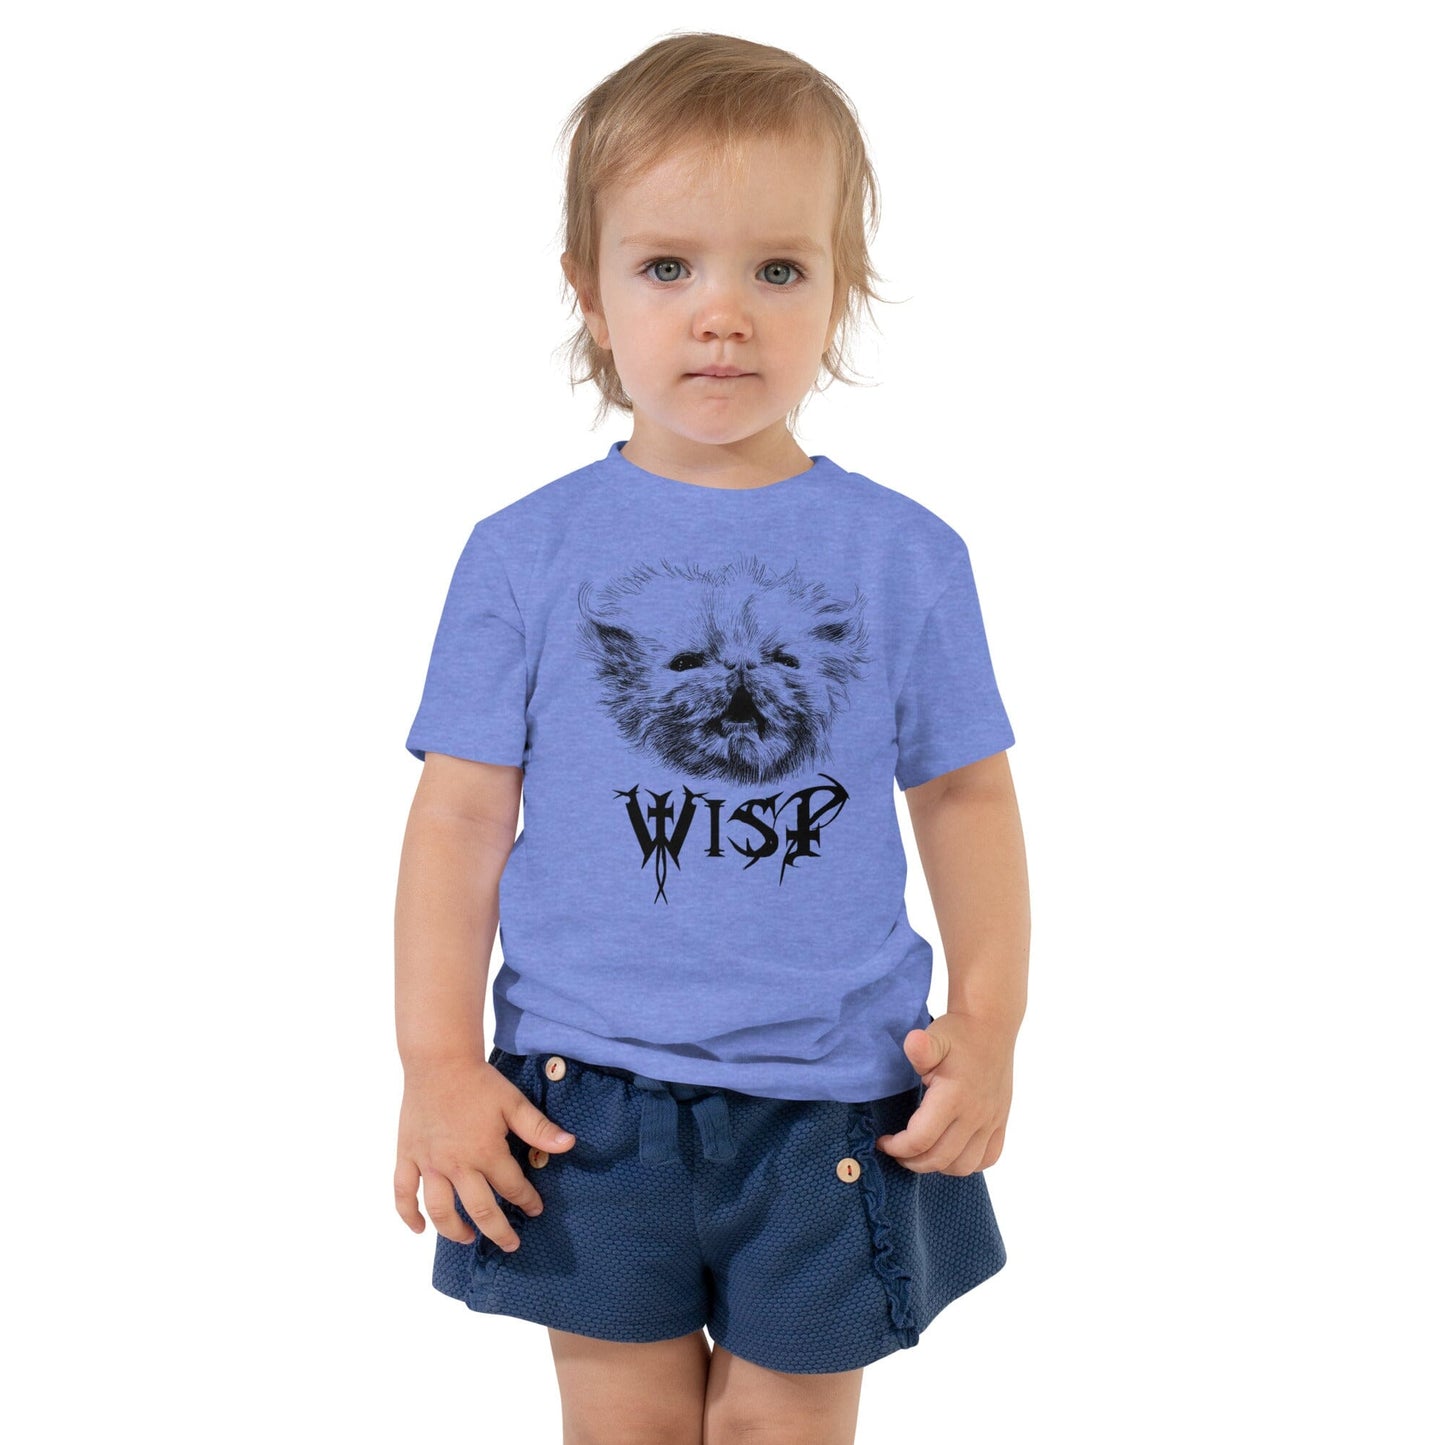 Metal Wisp TODDLER T-Shirt [Unfoiled] (All net proceeds go to Rags to Riches Animal Rescue) JoyousJoyfulJoyness Heather Columbia Blue 2T 